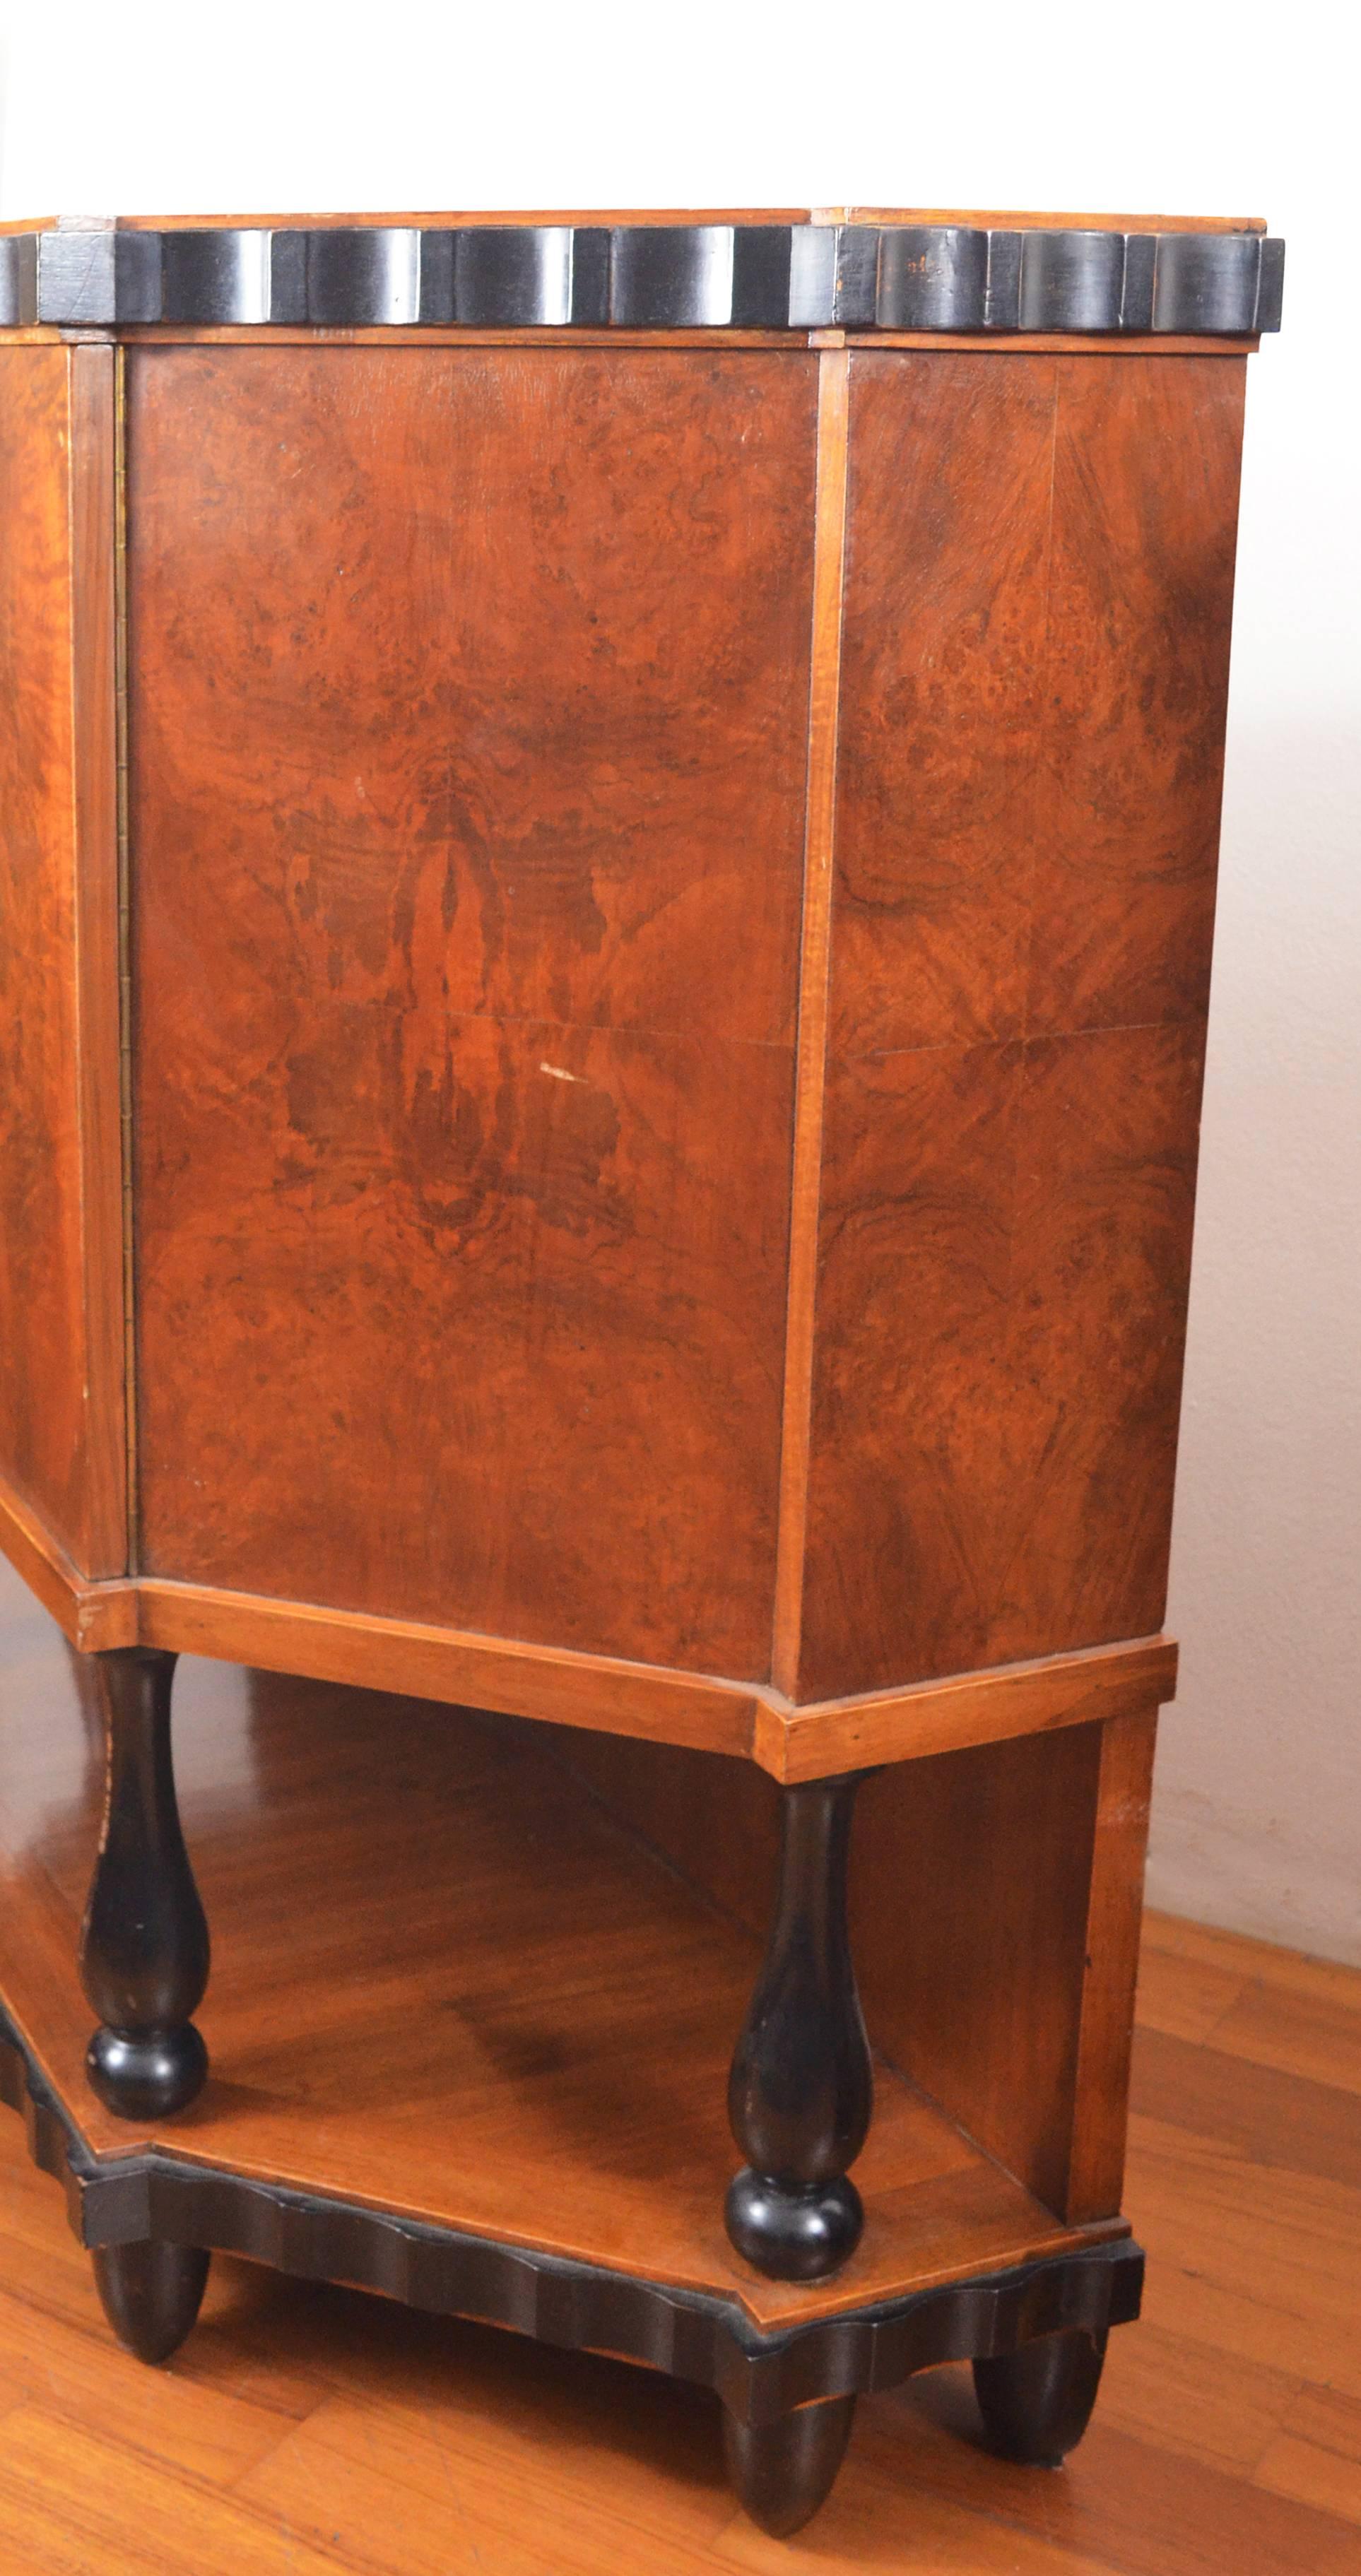 A pair of small Art Deco side cabinets, 1930, Italy.
The body of these two cabinets is entirely veneered with burr walnut and walnut, as well as the front door.
The top of each cabinet is shaped with canted angles above a central door enclosing a